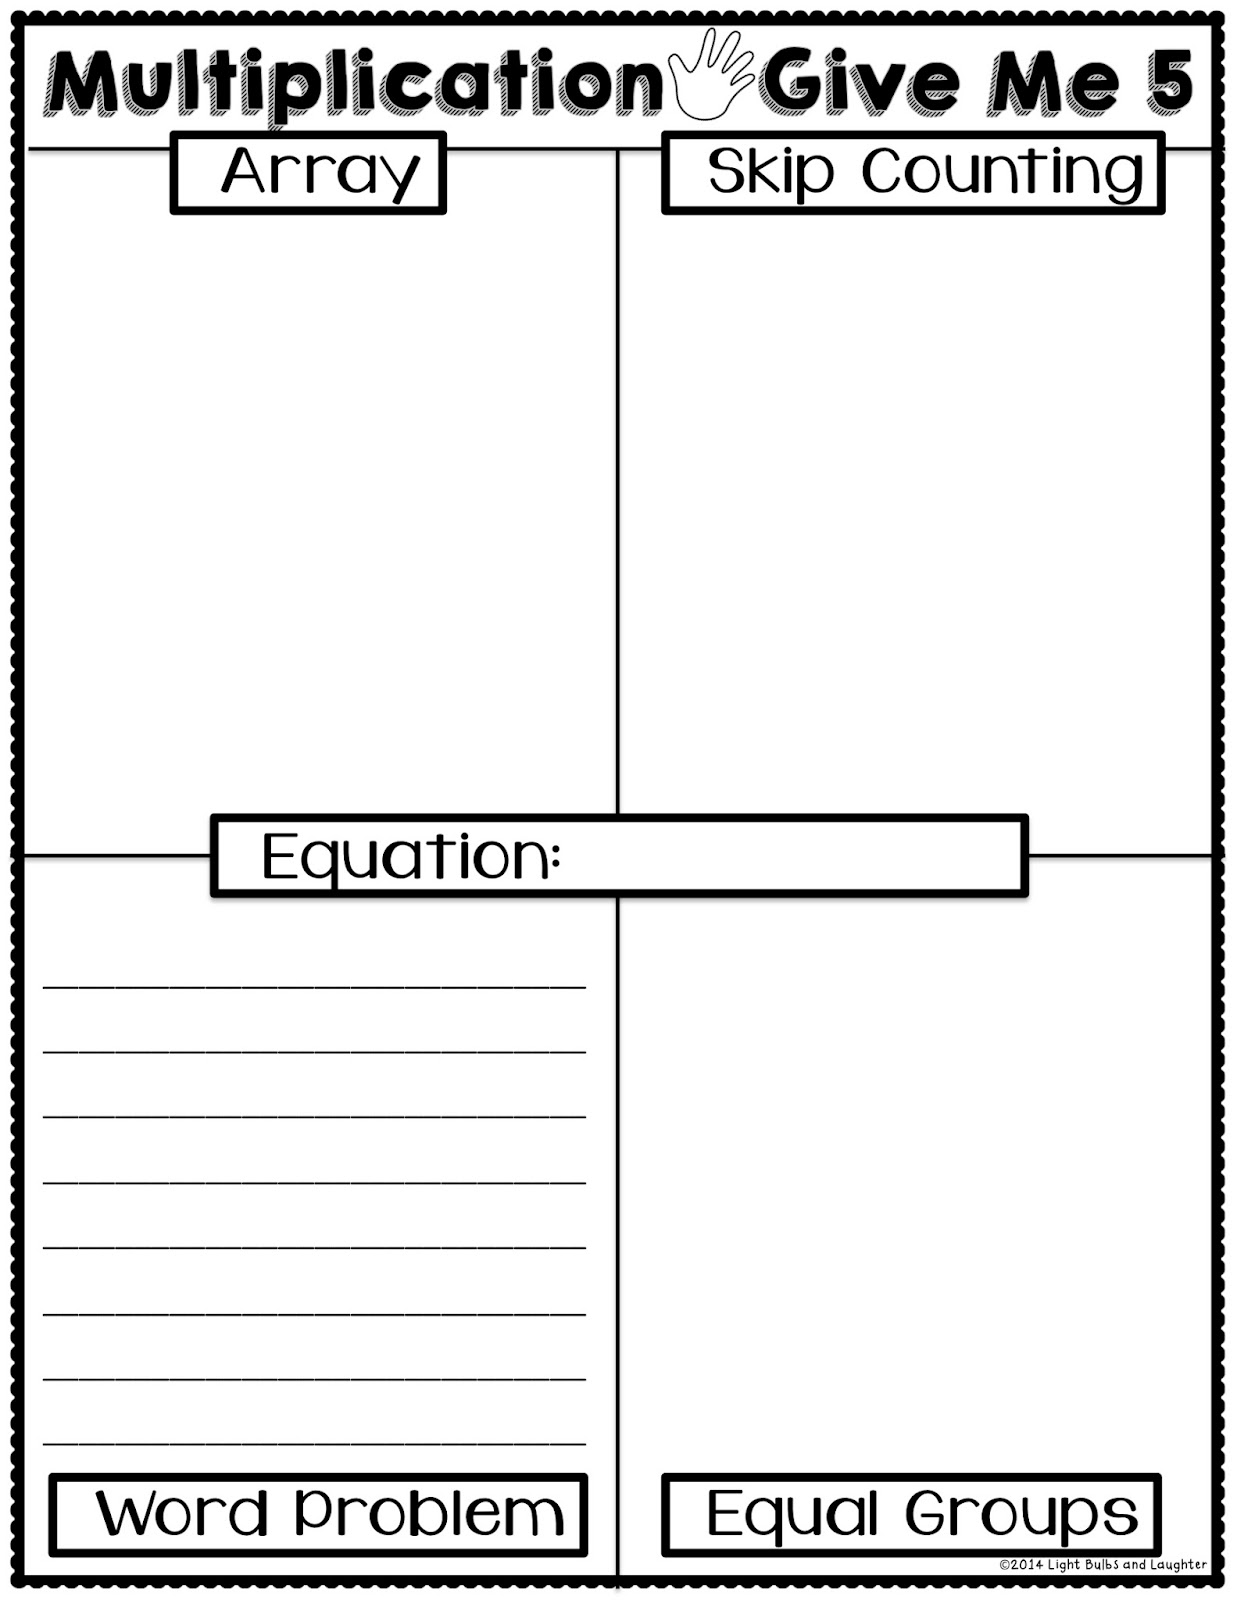 Light Bulbs and Laughter - Multiplication Give Me 5 Worksheet